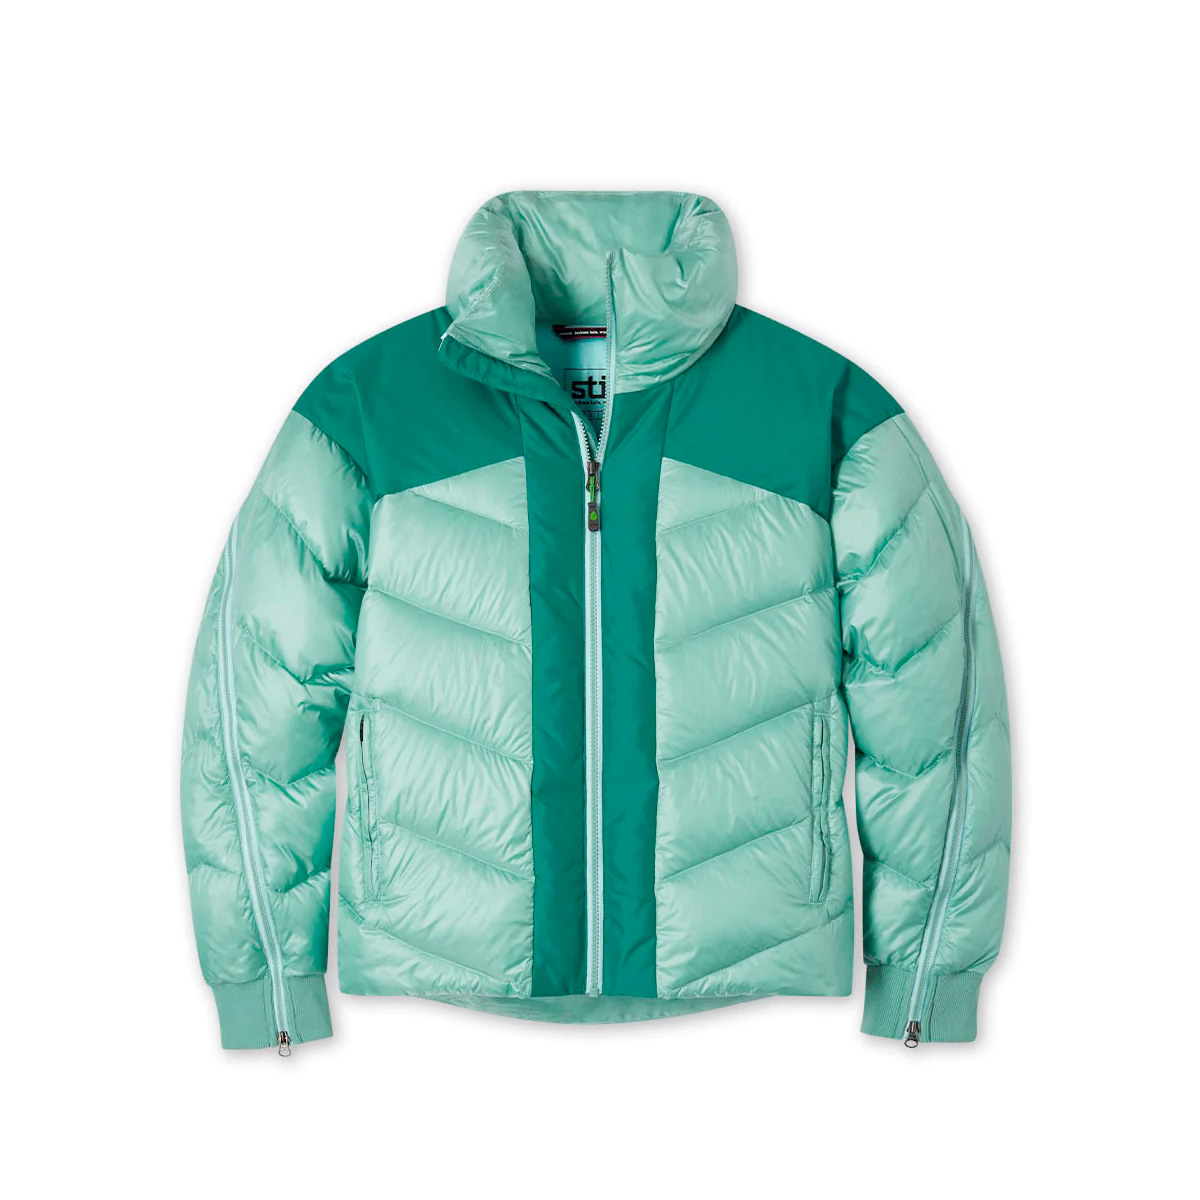 Stio Women's Tayloe Down Jacket - Dusted Agave